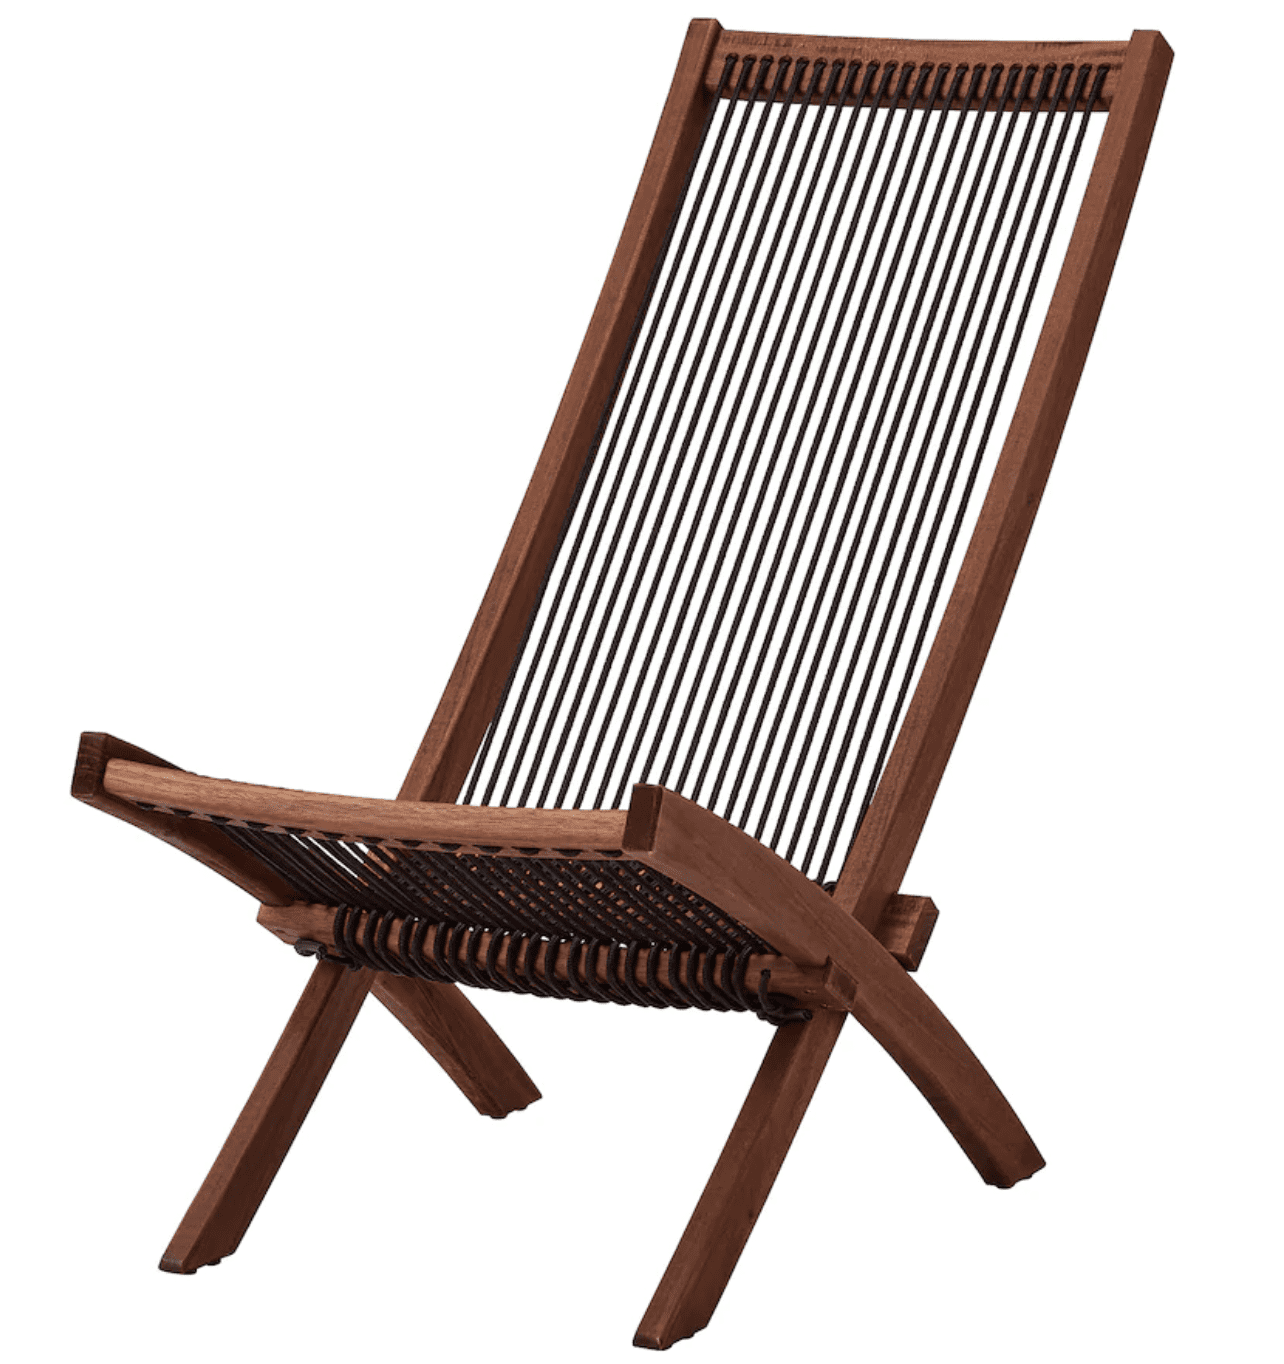 Comfy Lounge Chair Outdoor : 51 Outdoor Chaise Lounge Chairs To Soak Up